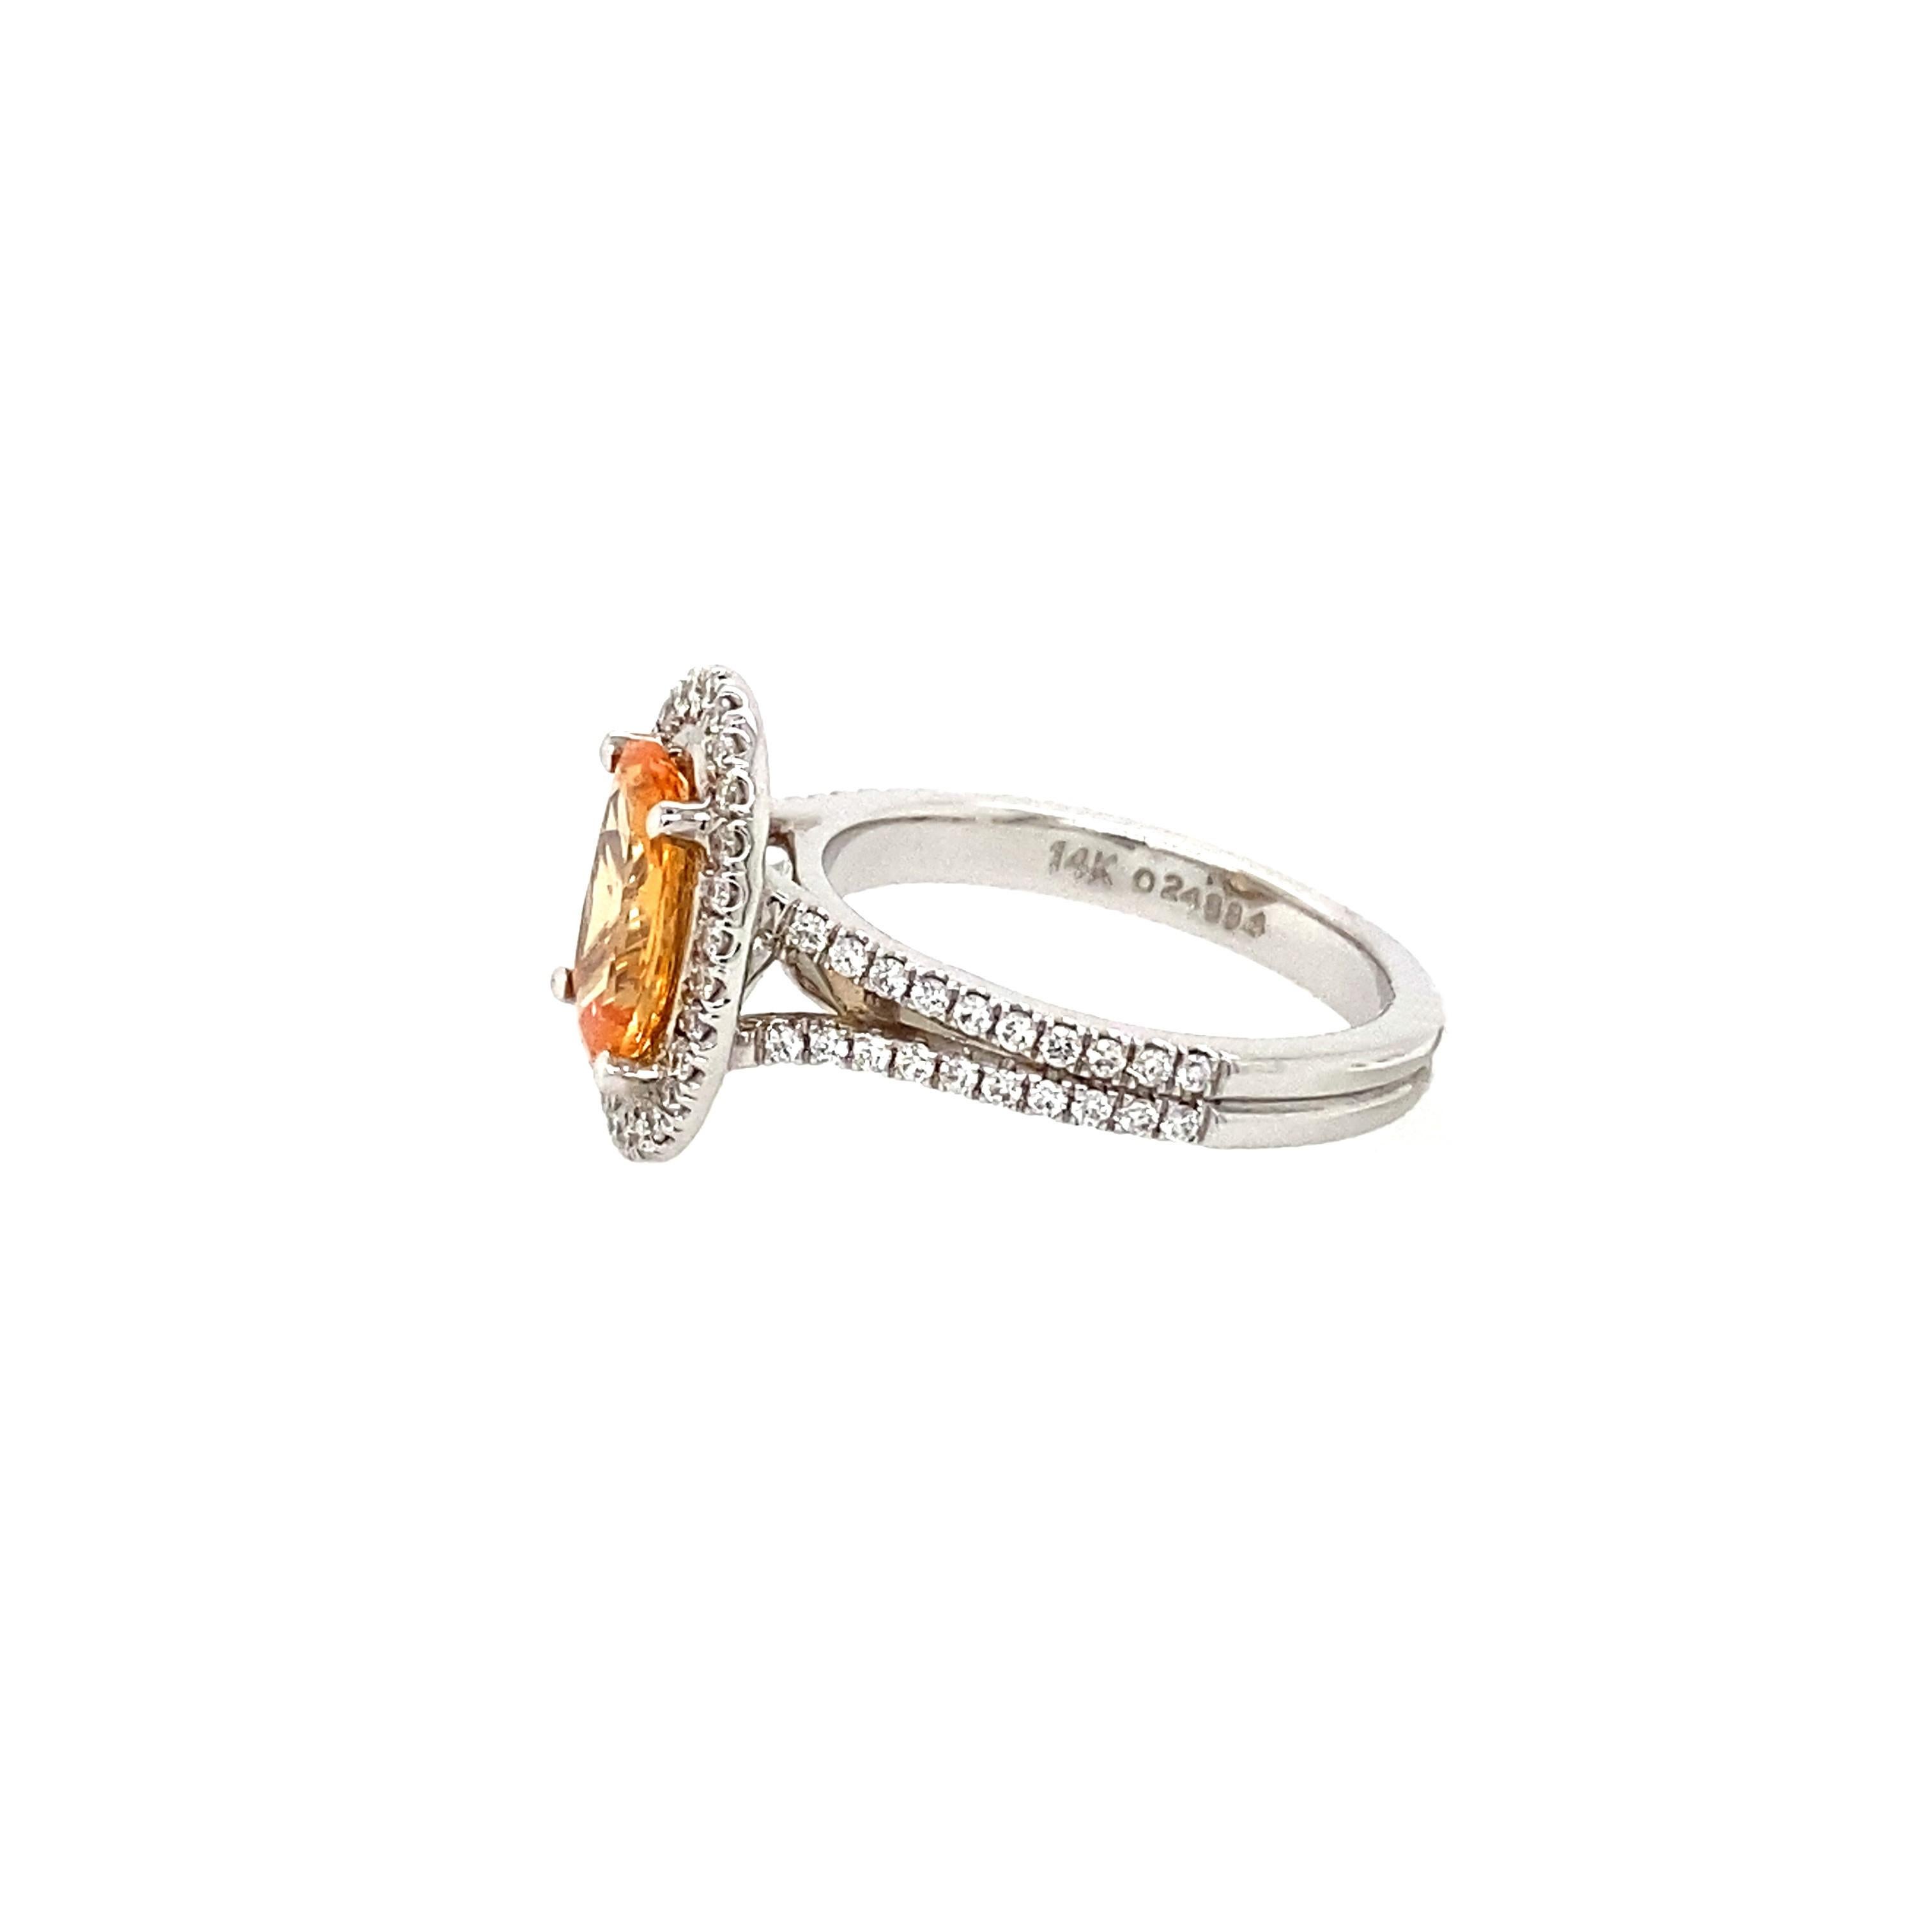 2.0 Carat Oval Madagascar Sapphire ring set in a Halo of Diamonds with a Split Shank. 

68 round Brilliant Diamonds .41 Carat Total Weight H-I/I1  

Madagascar Orange sapphires are quite unusual. This Fashionable ring can be worn any time of the